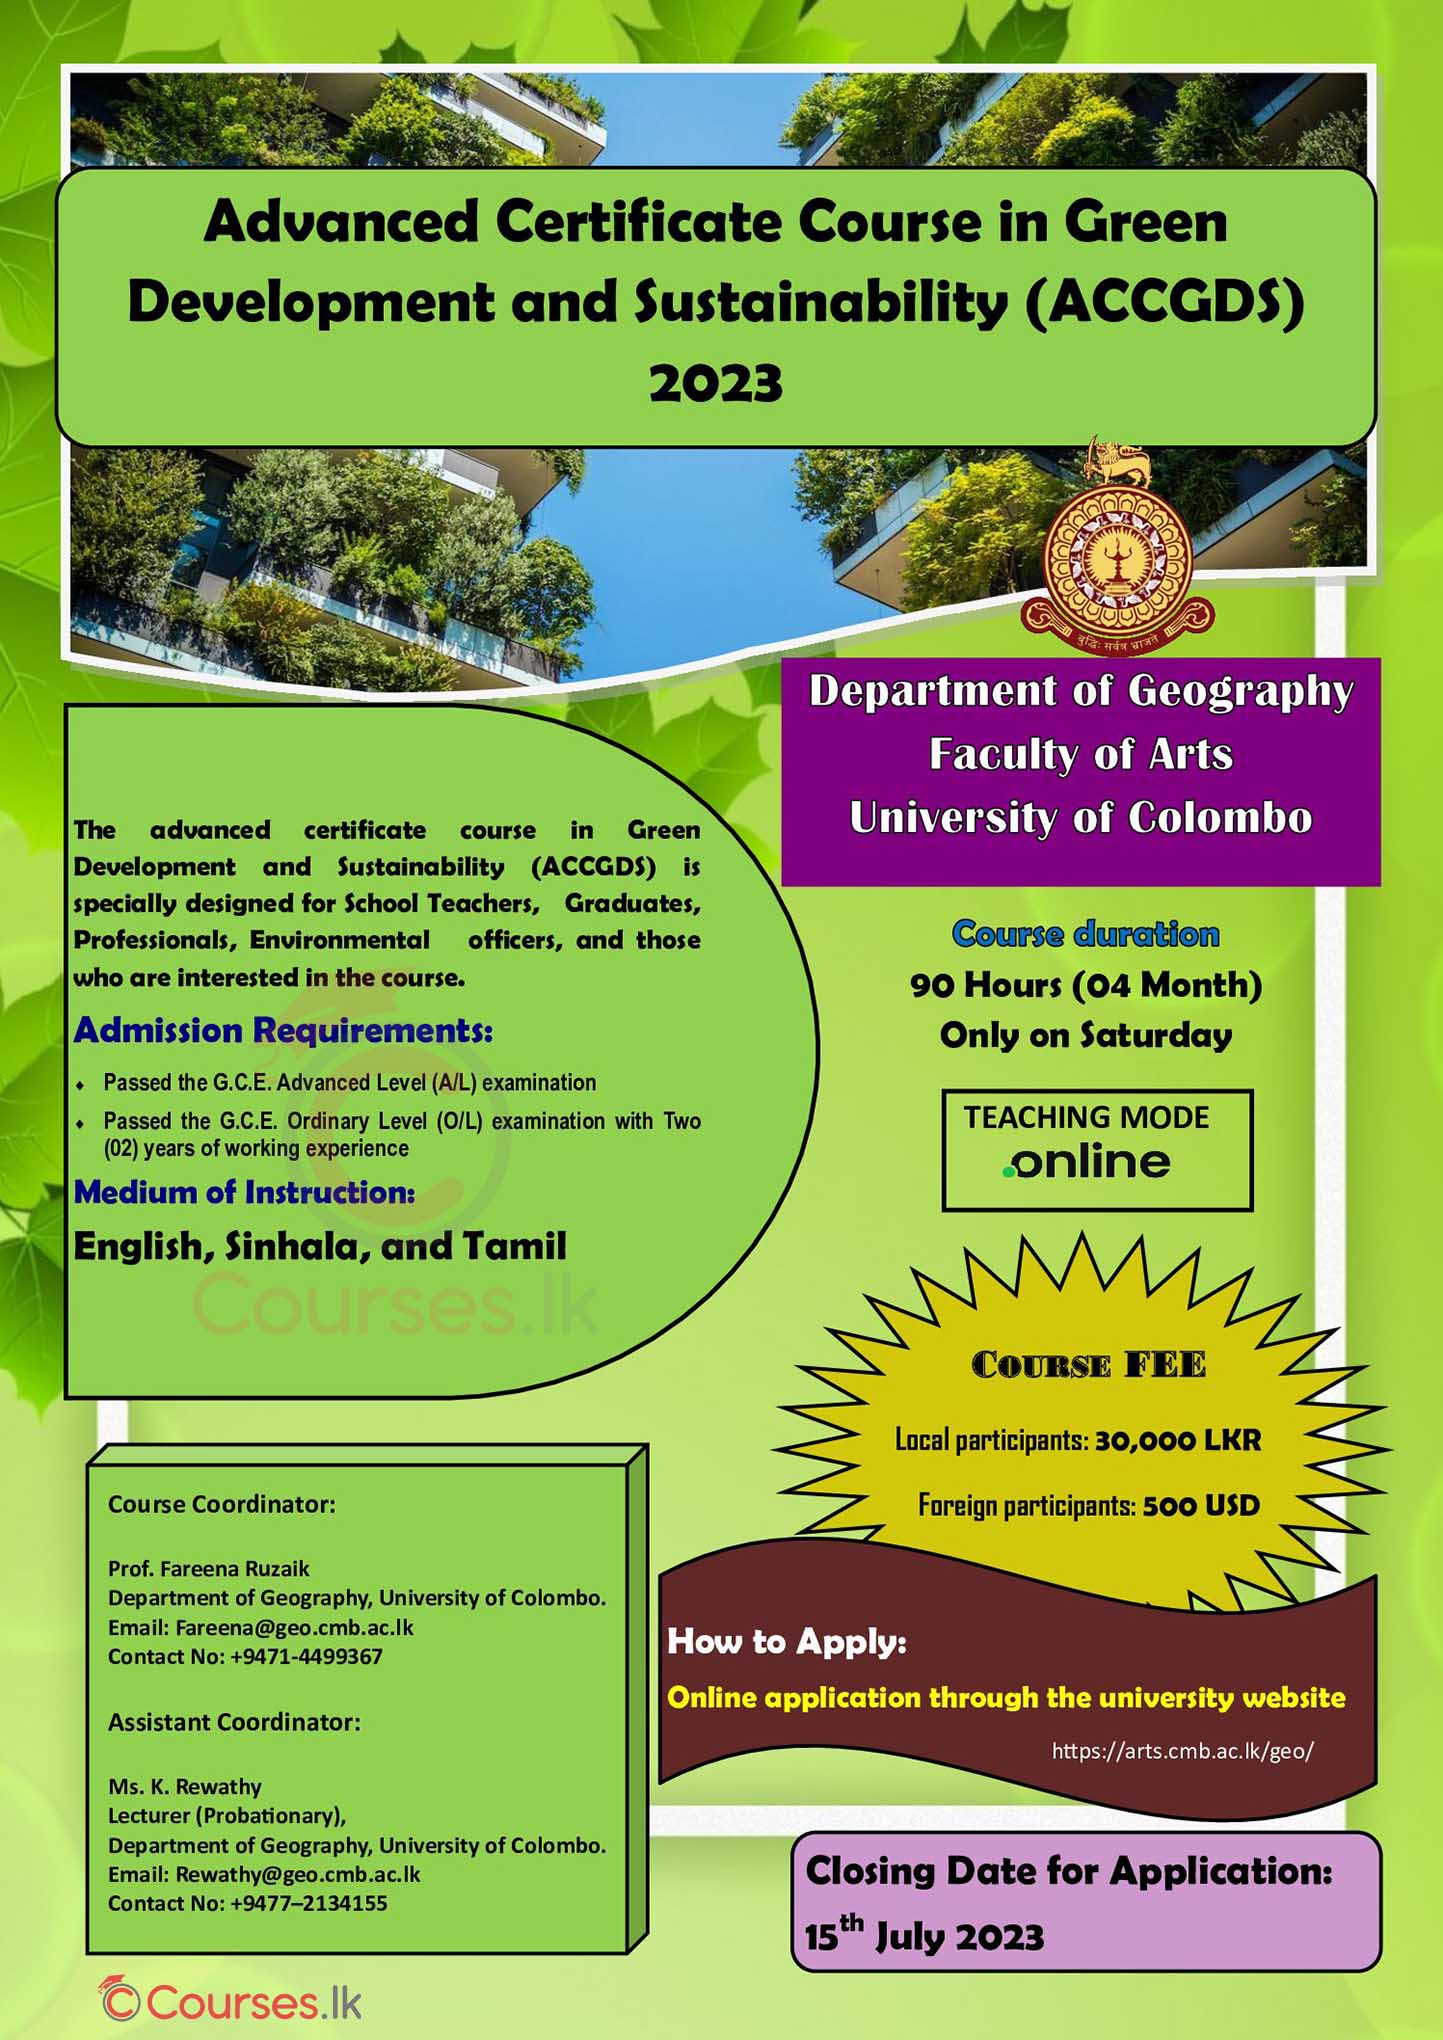 Advanced Certificate Course in Green Development & Sustainability 2023 - University of Colombo